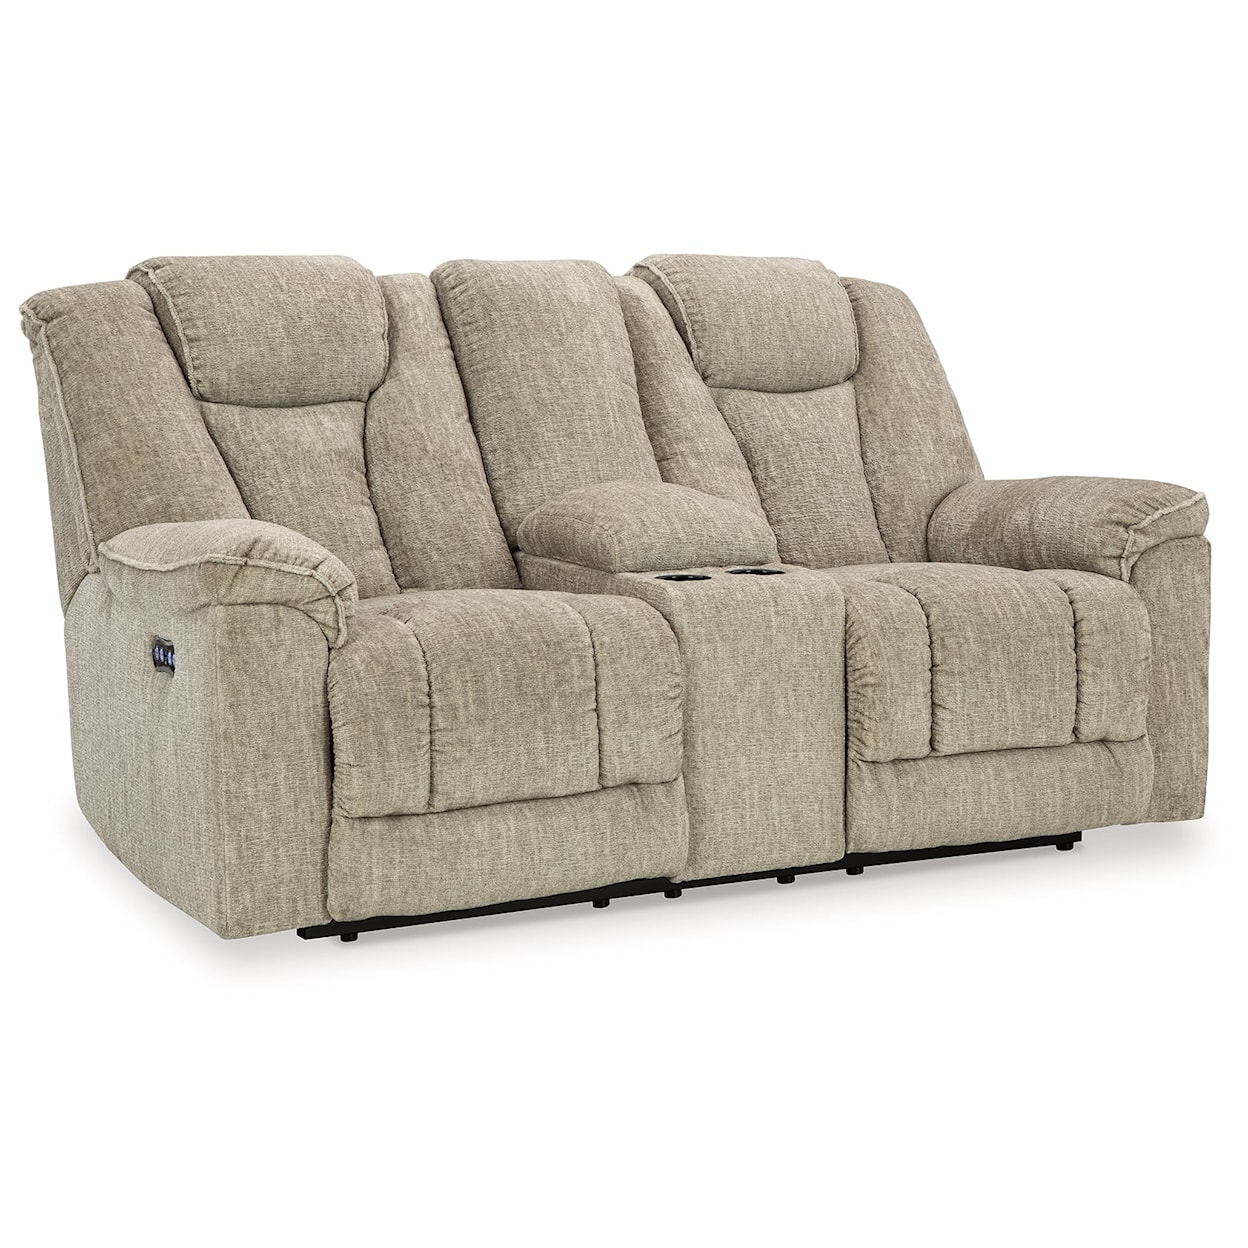 Benchcraft Hindmarsh Power Reclining Loveseat With Console